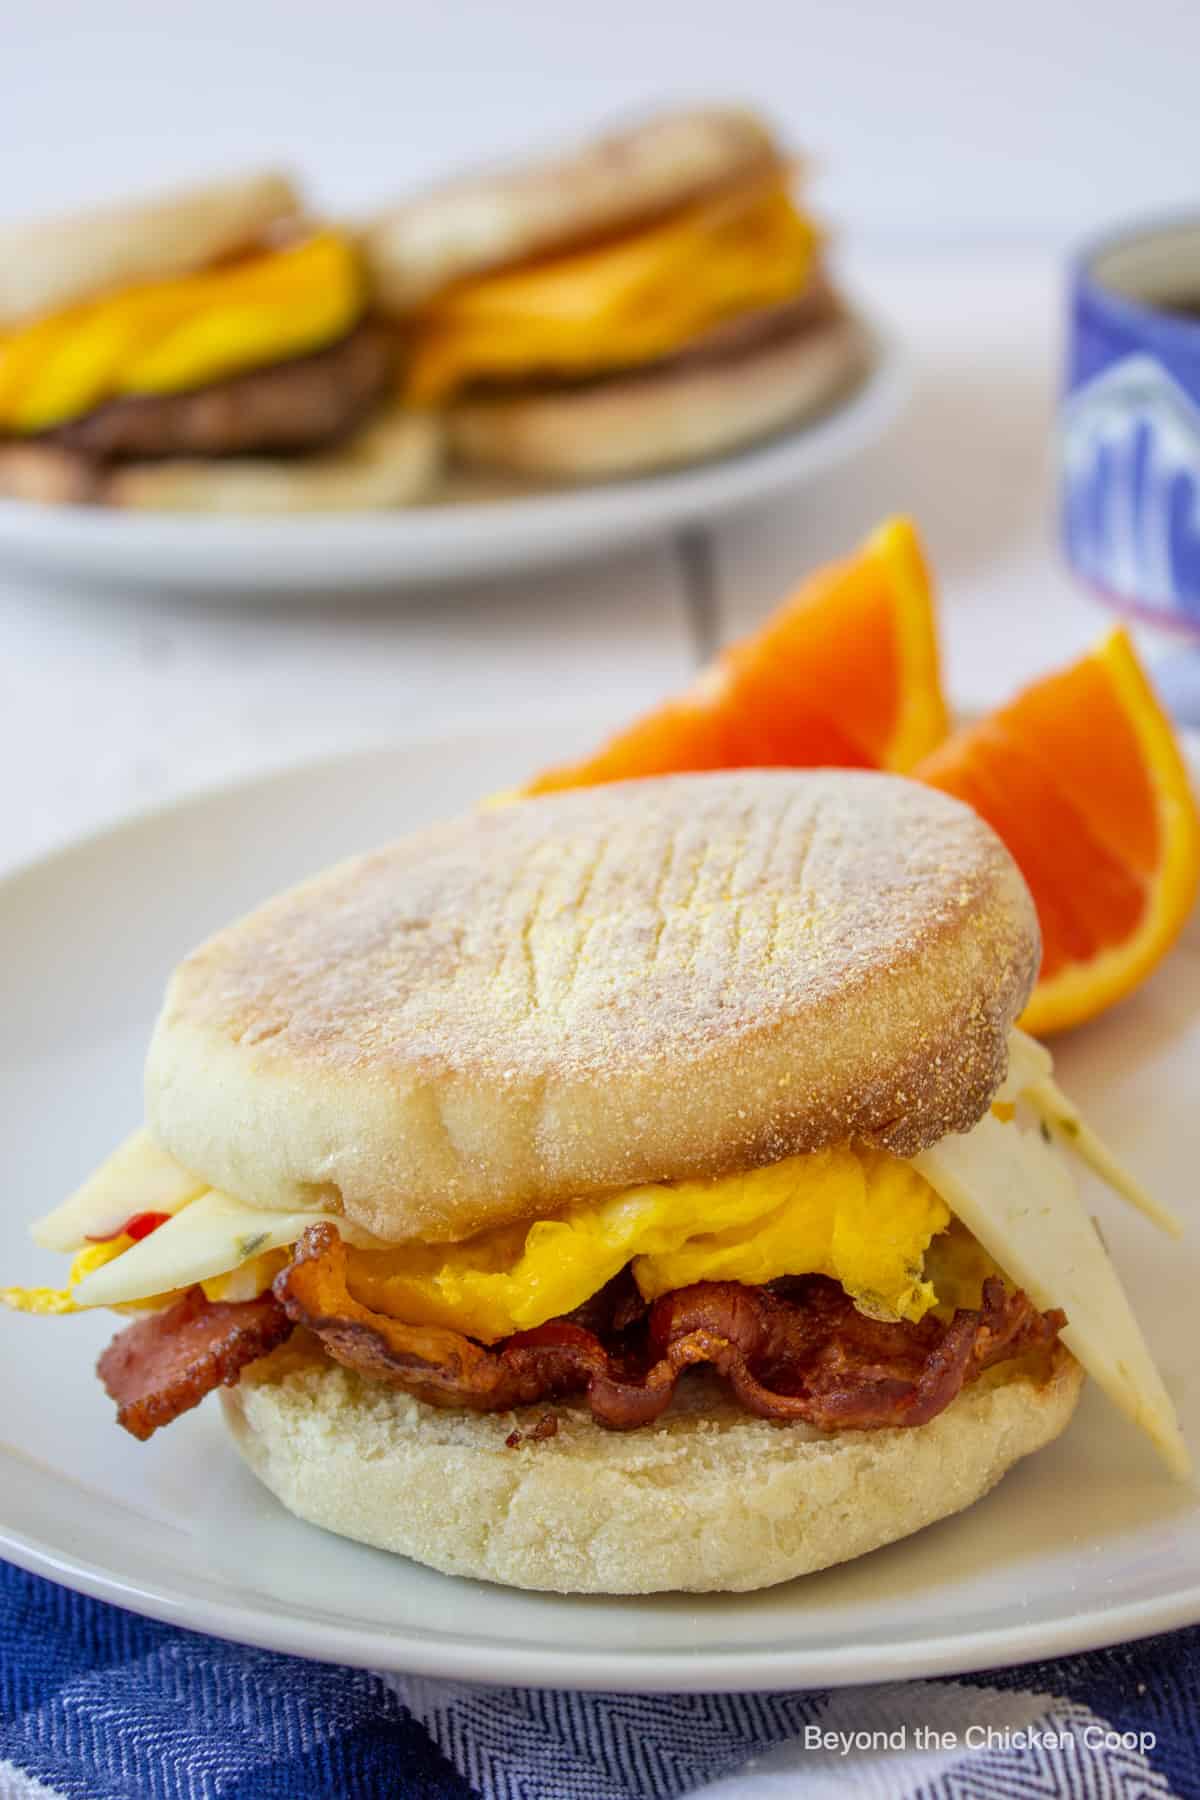 A bacon and egg sandwich.